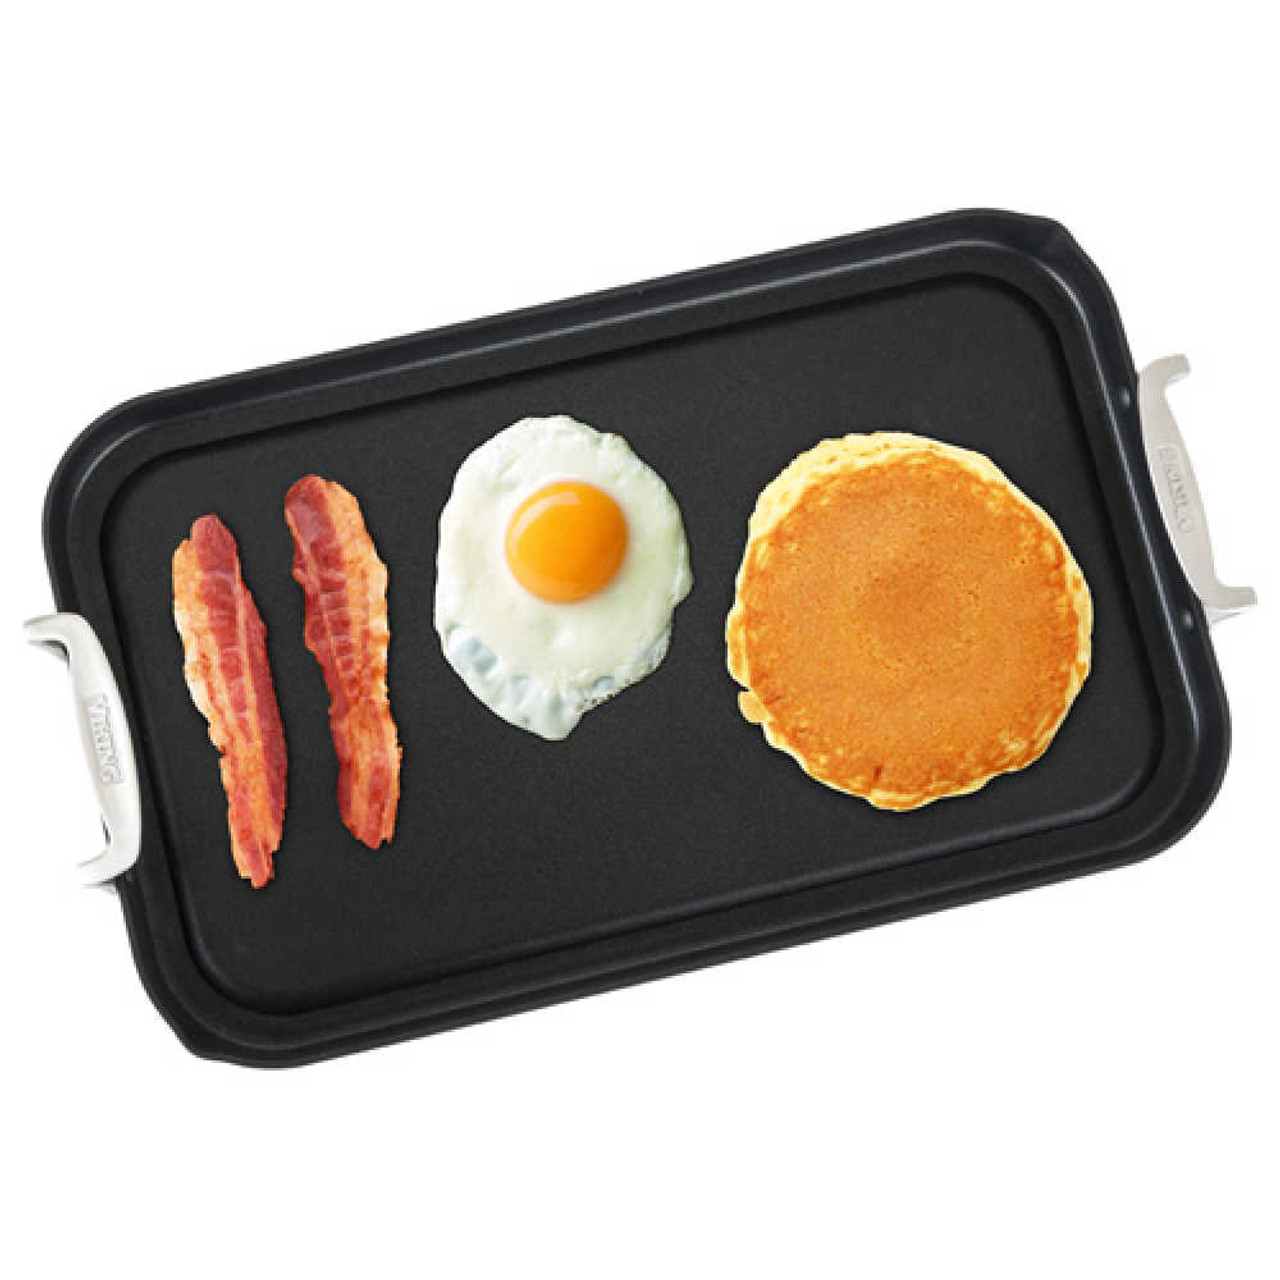 https://cdn11.bigcommerce.com/s-hccytny0od/images/stencil/1280x1280/products/4822/19667/Viking_Hard_Anodized_Nonstick_Double_Burner_Griddle_1__58446.1656021071.jpg?c=2?imbypass=on